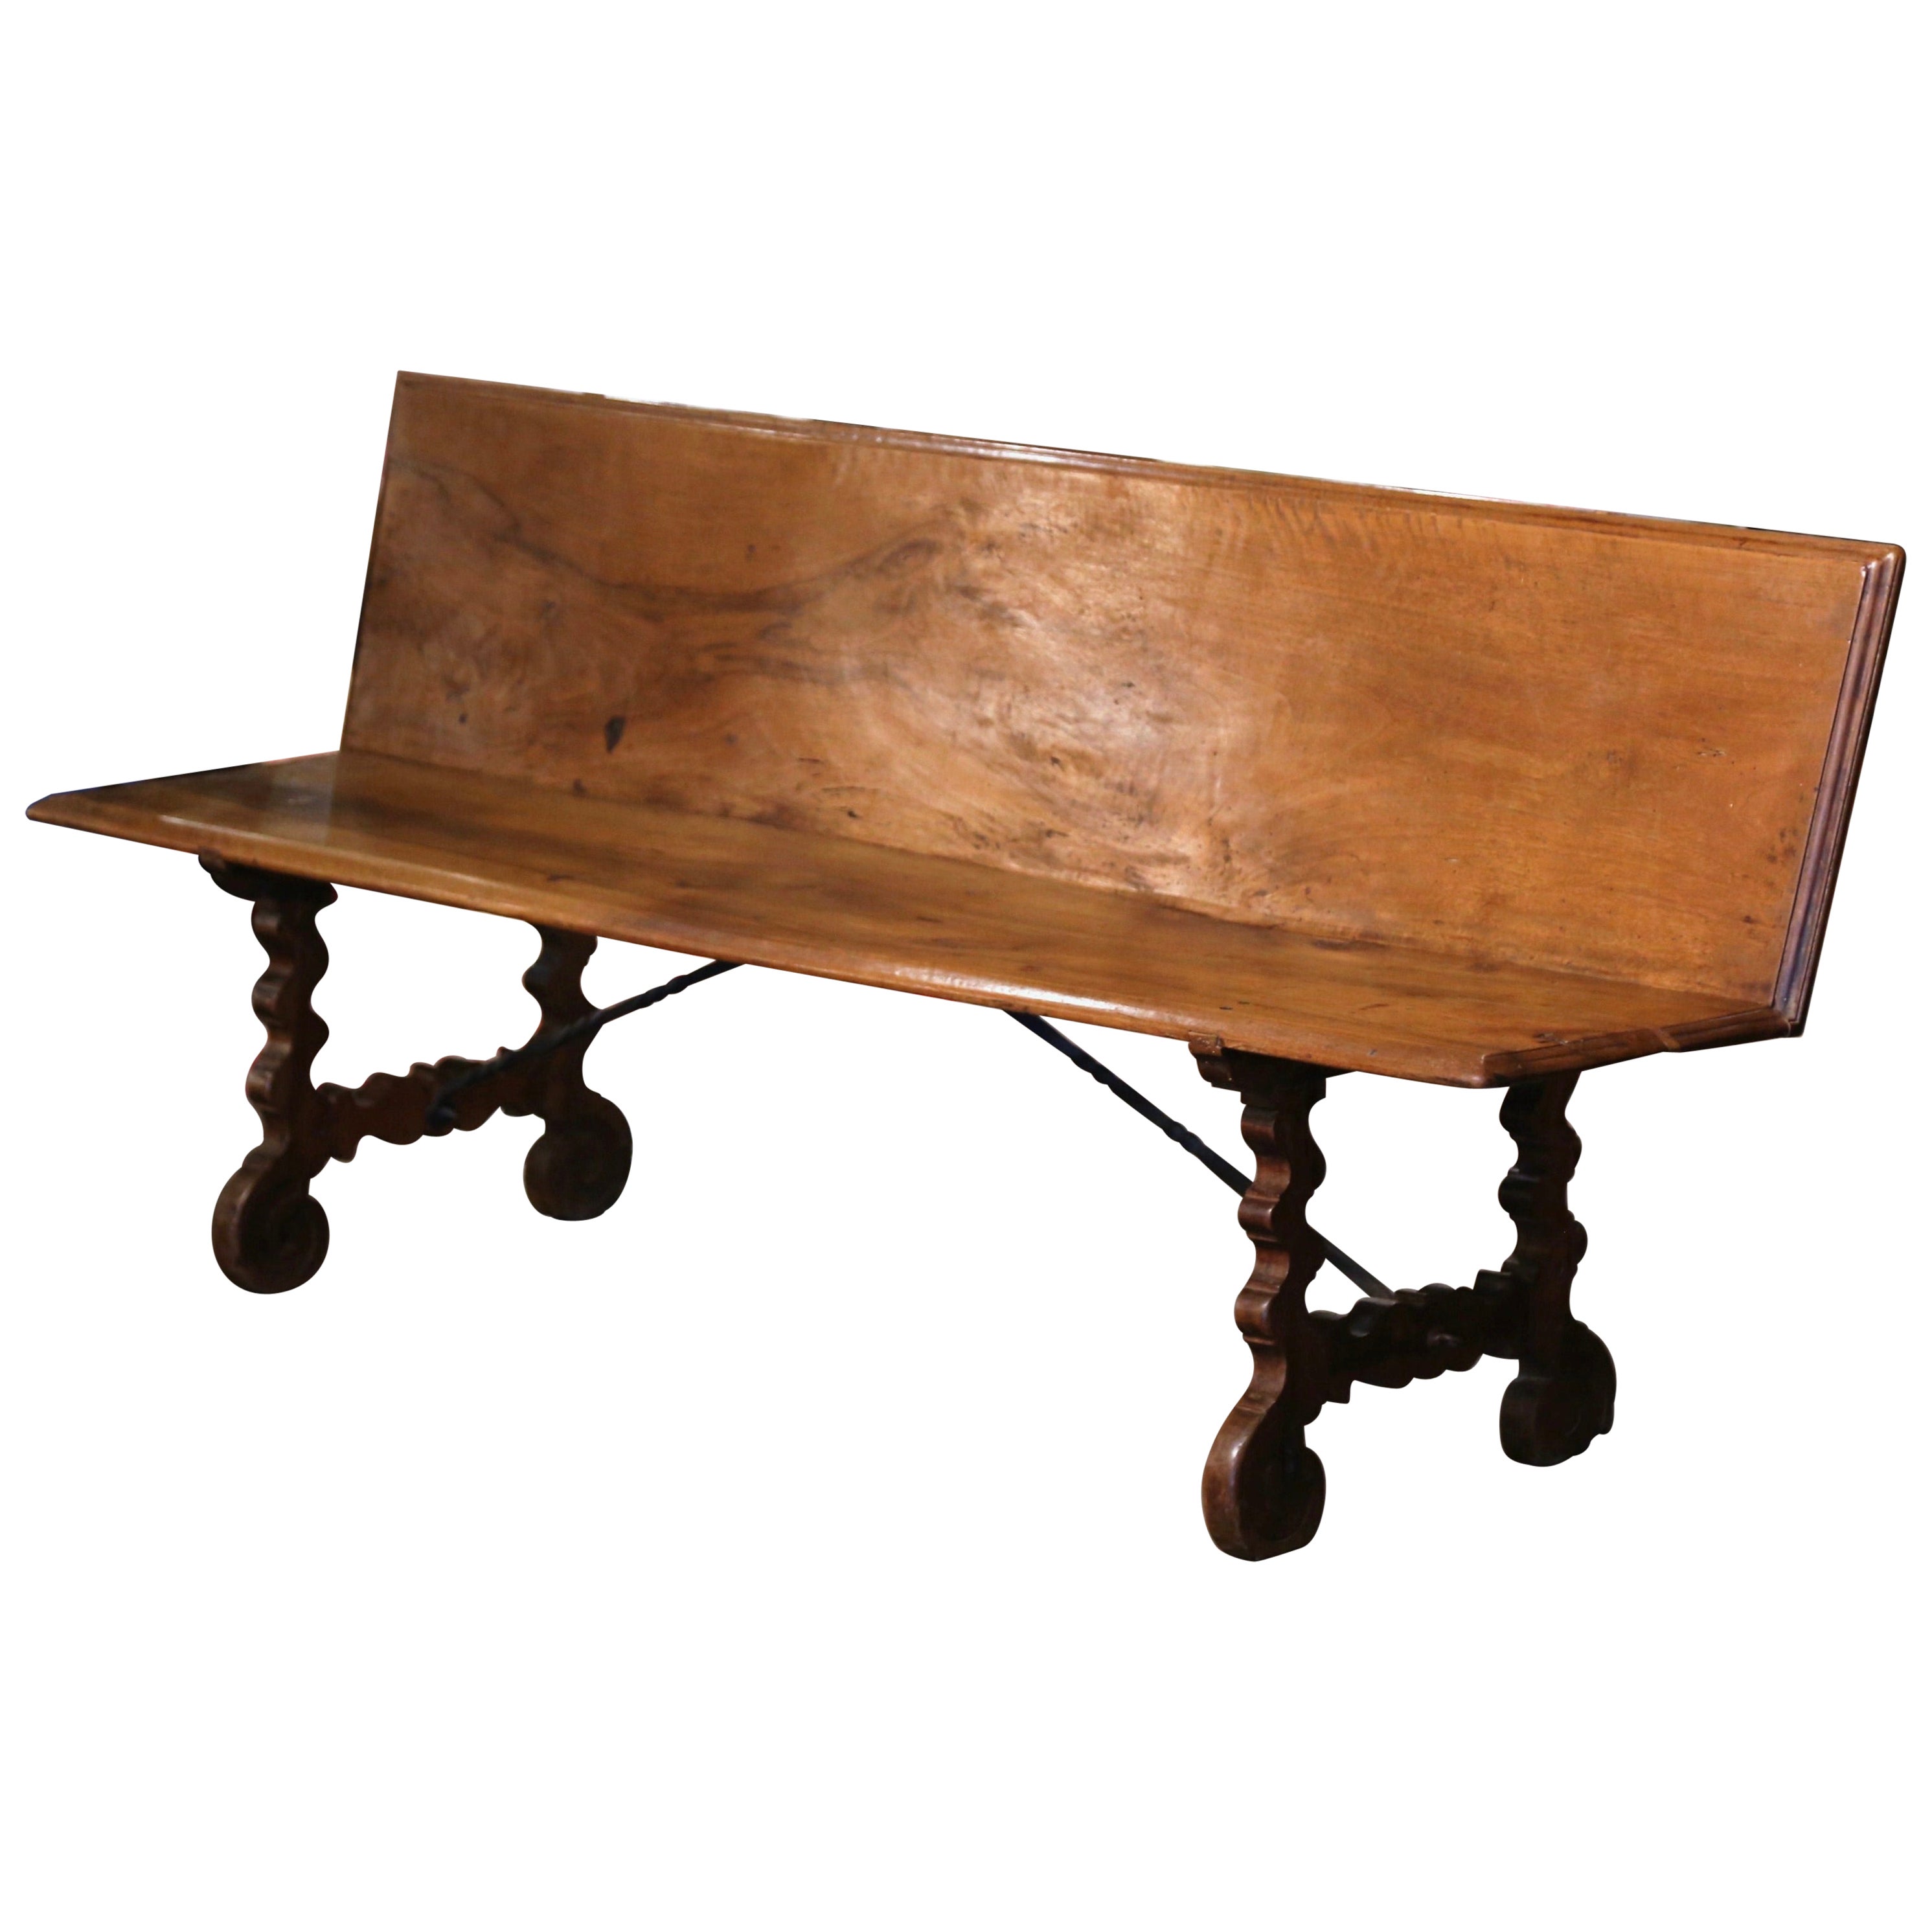 19th Century Spanish Baroque Carved Walnut Bench with Wrought Iron Stretcher